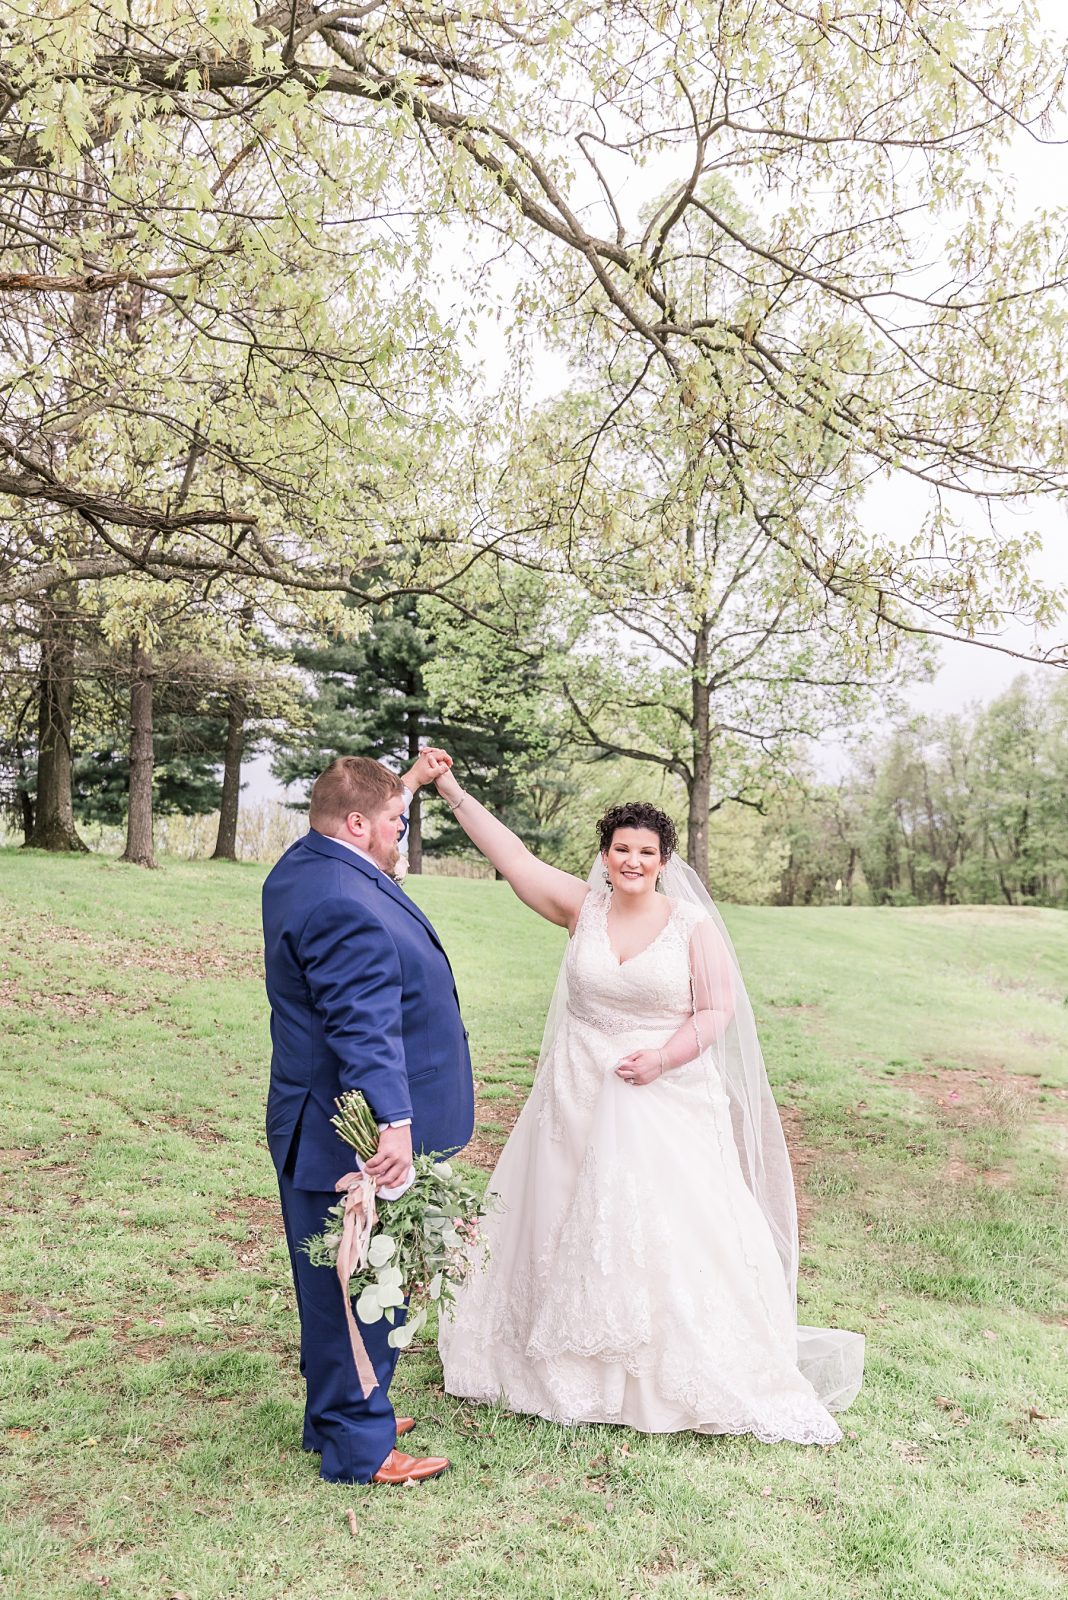 Wedding photography by Diana Gramlich, Bride twirling while groom looking at her